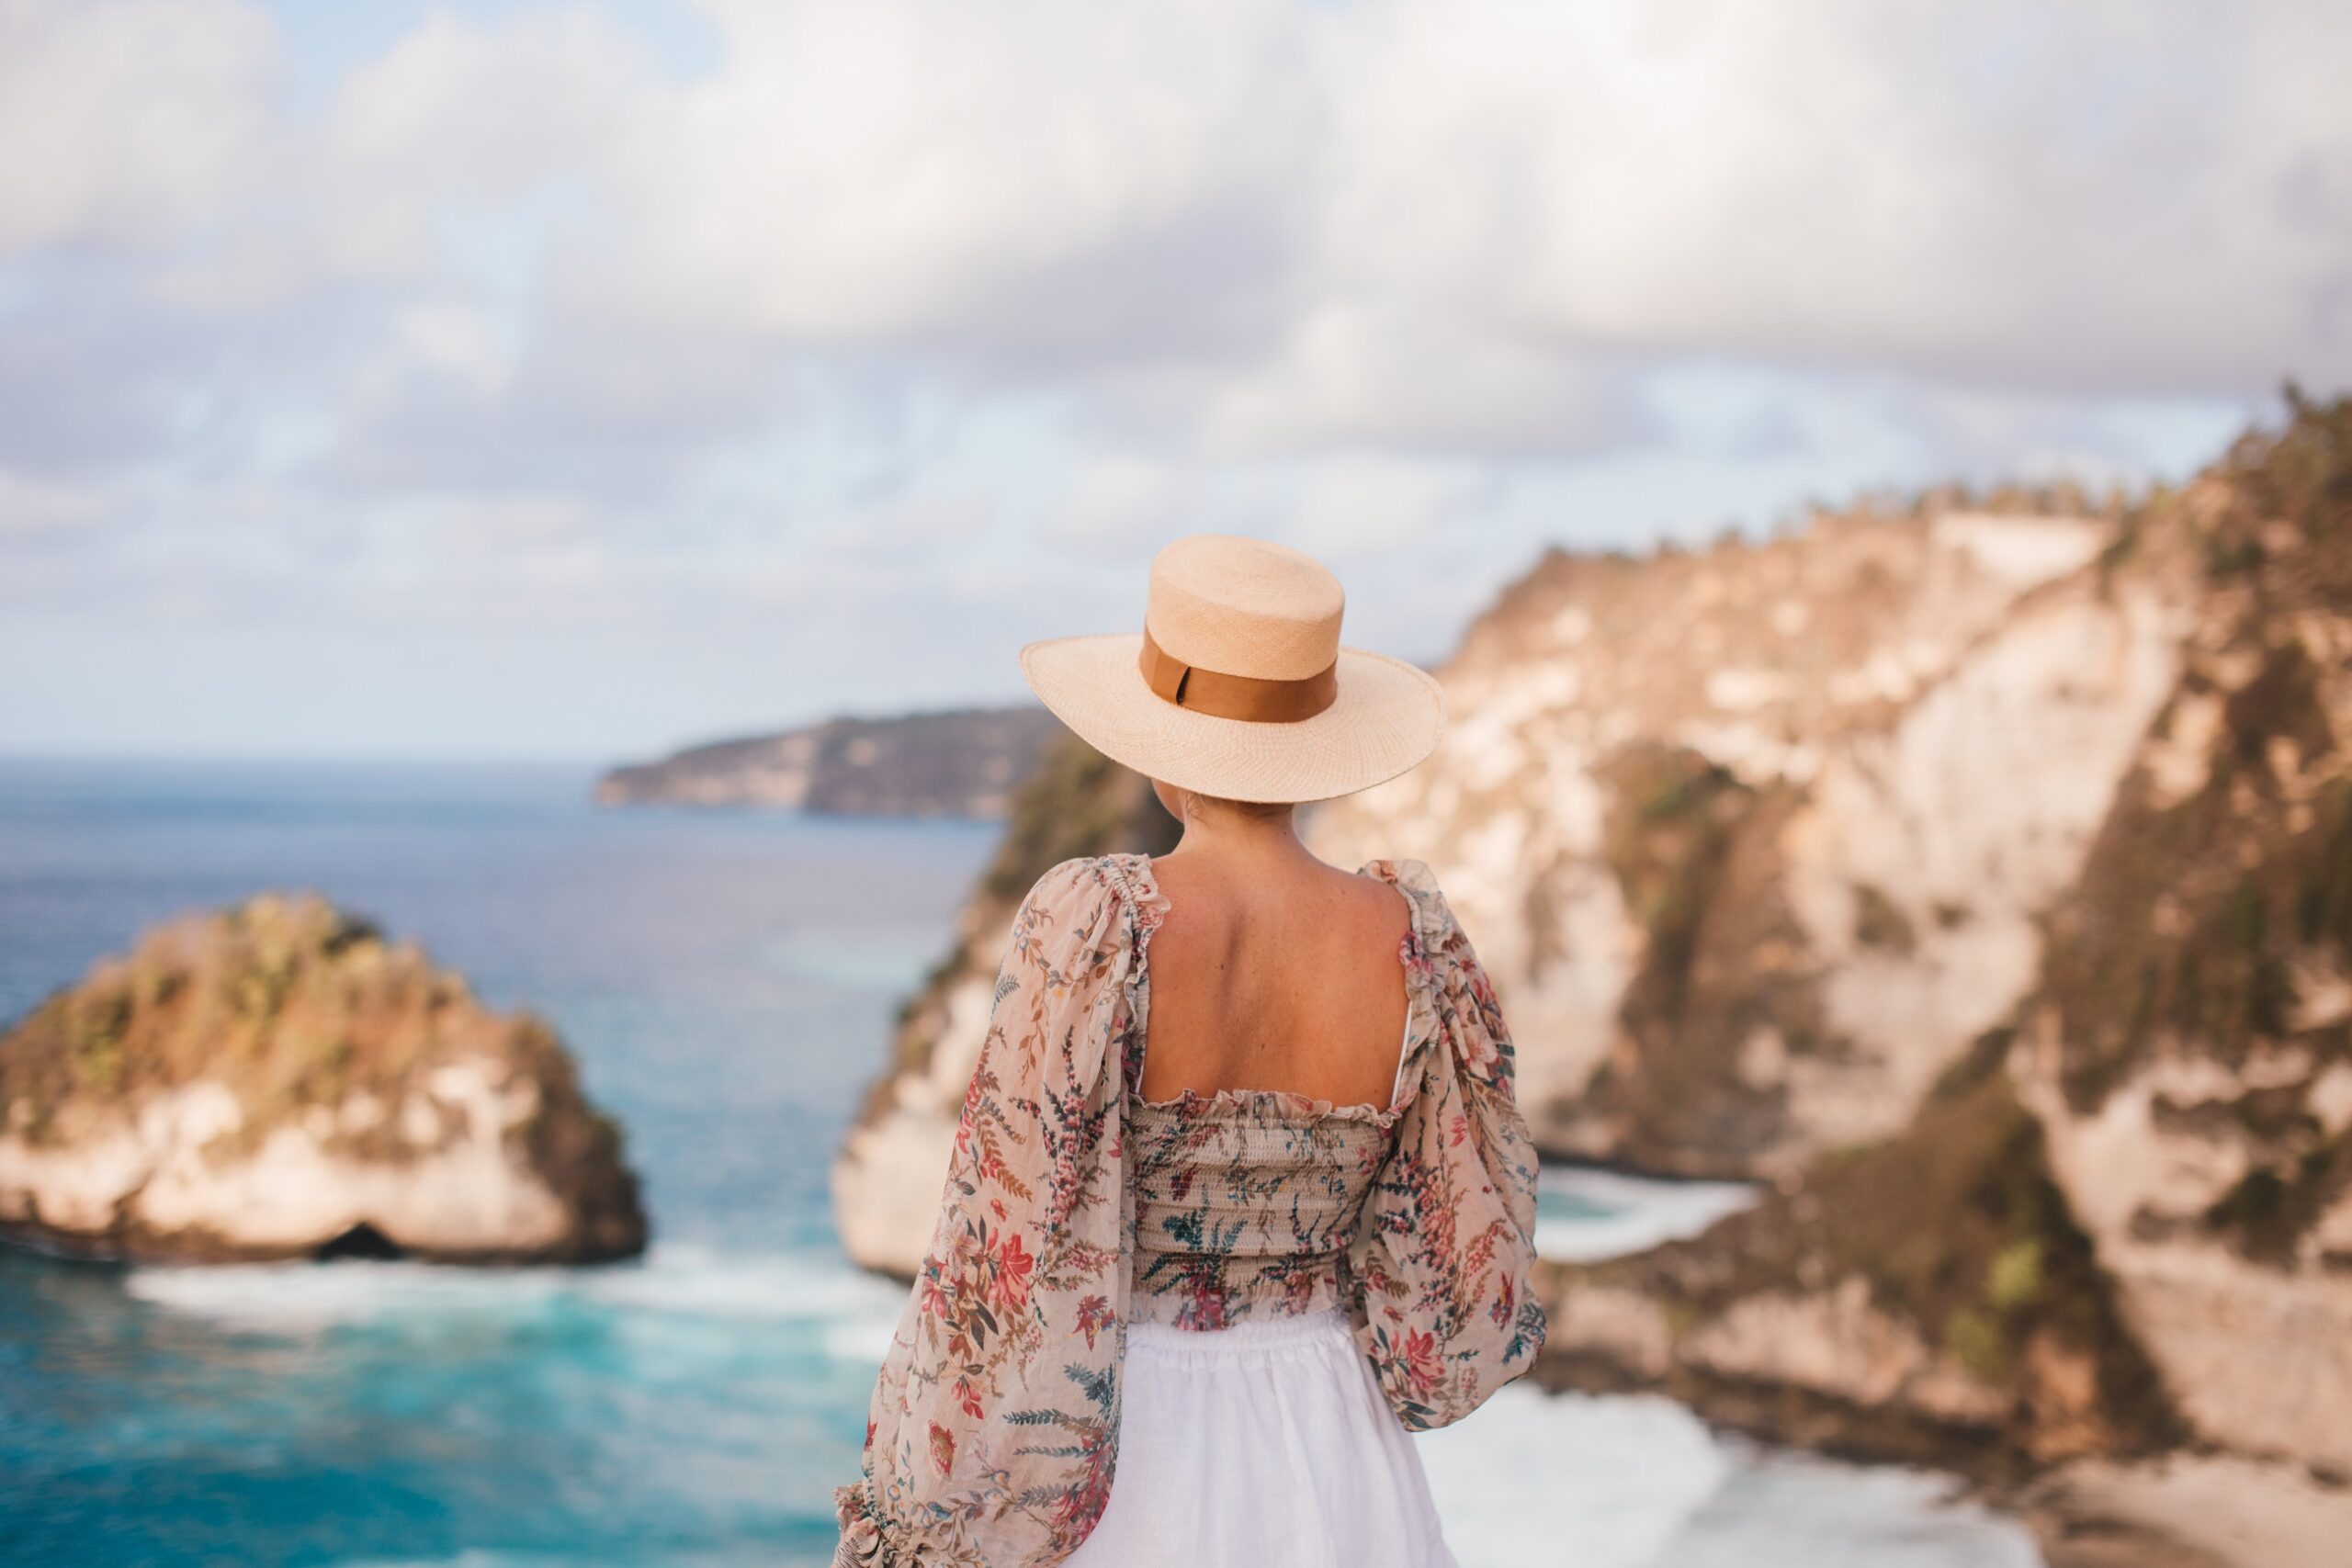 image of a woman wearing a straw hat and flowy top overlooking the ocean